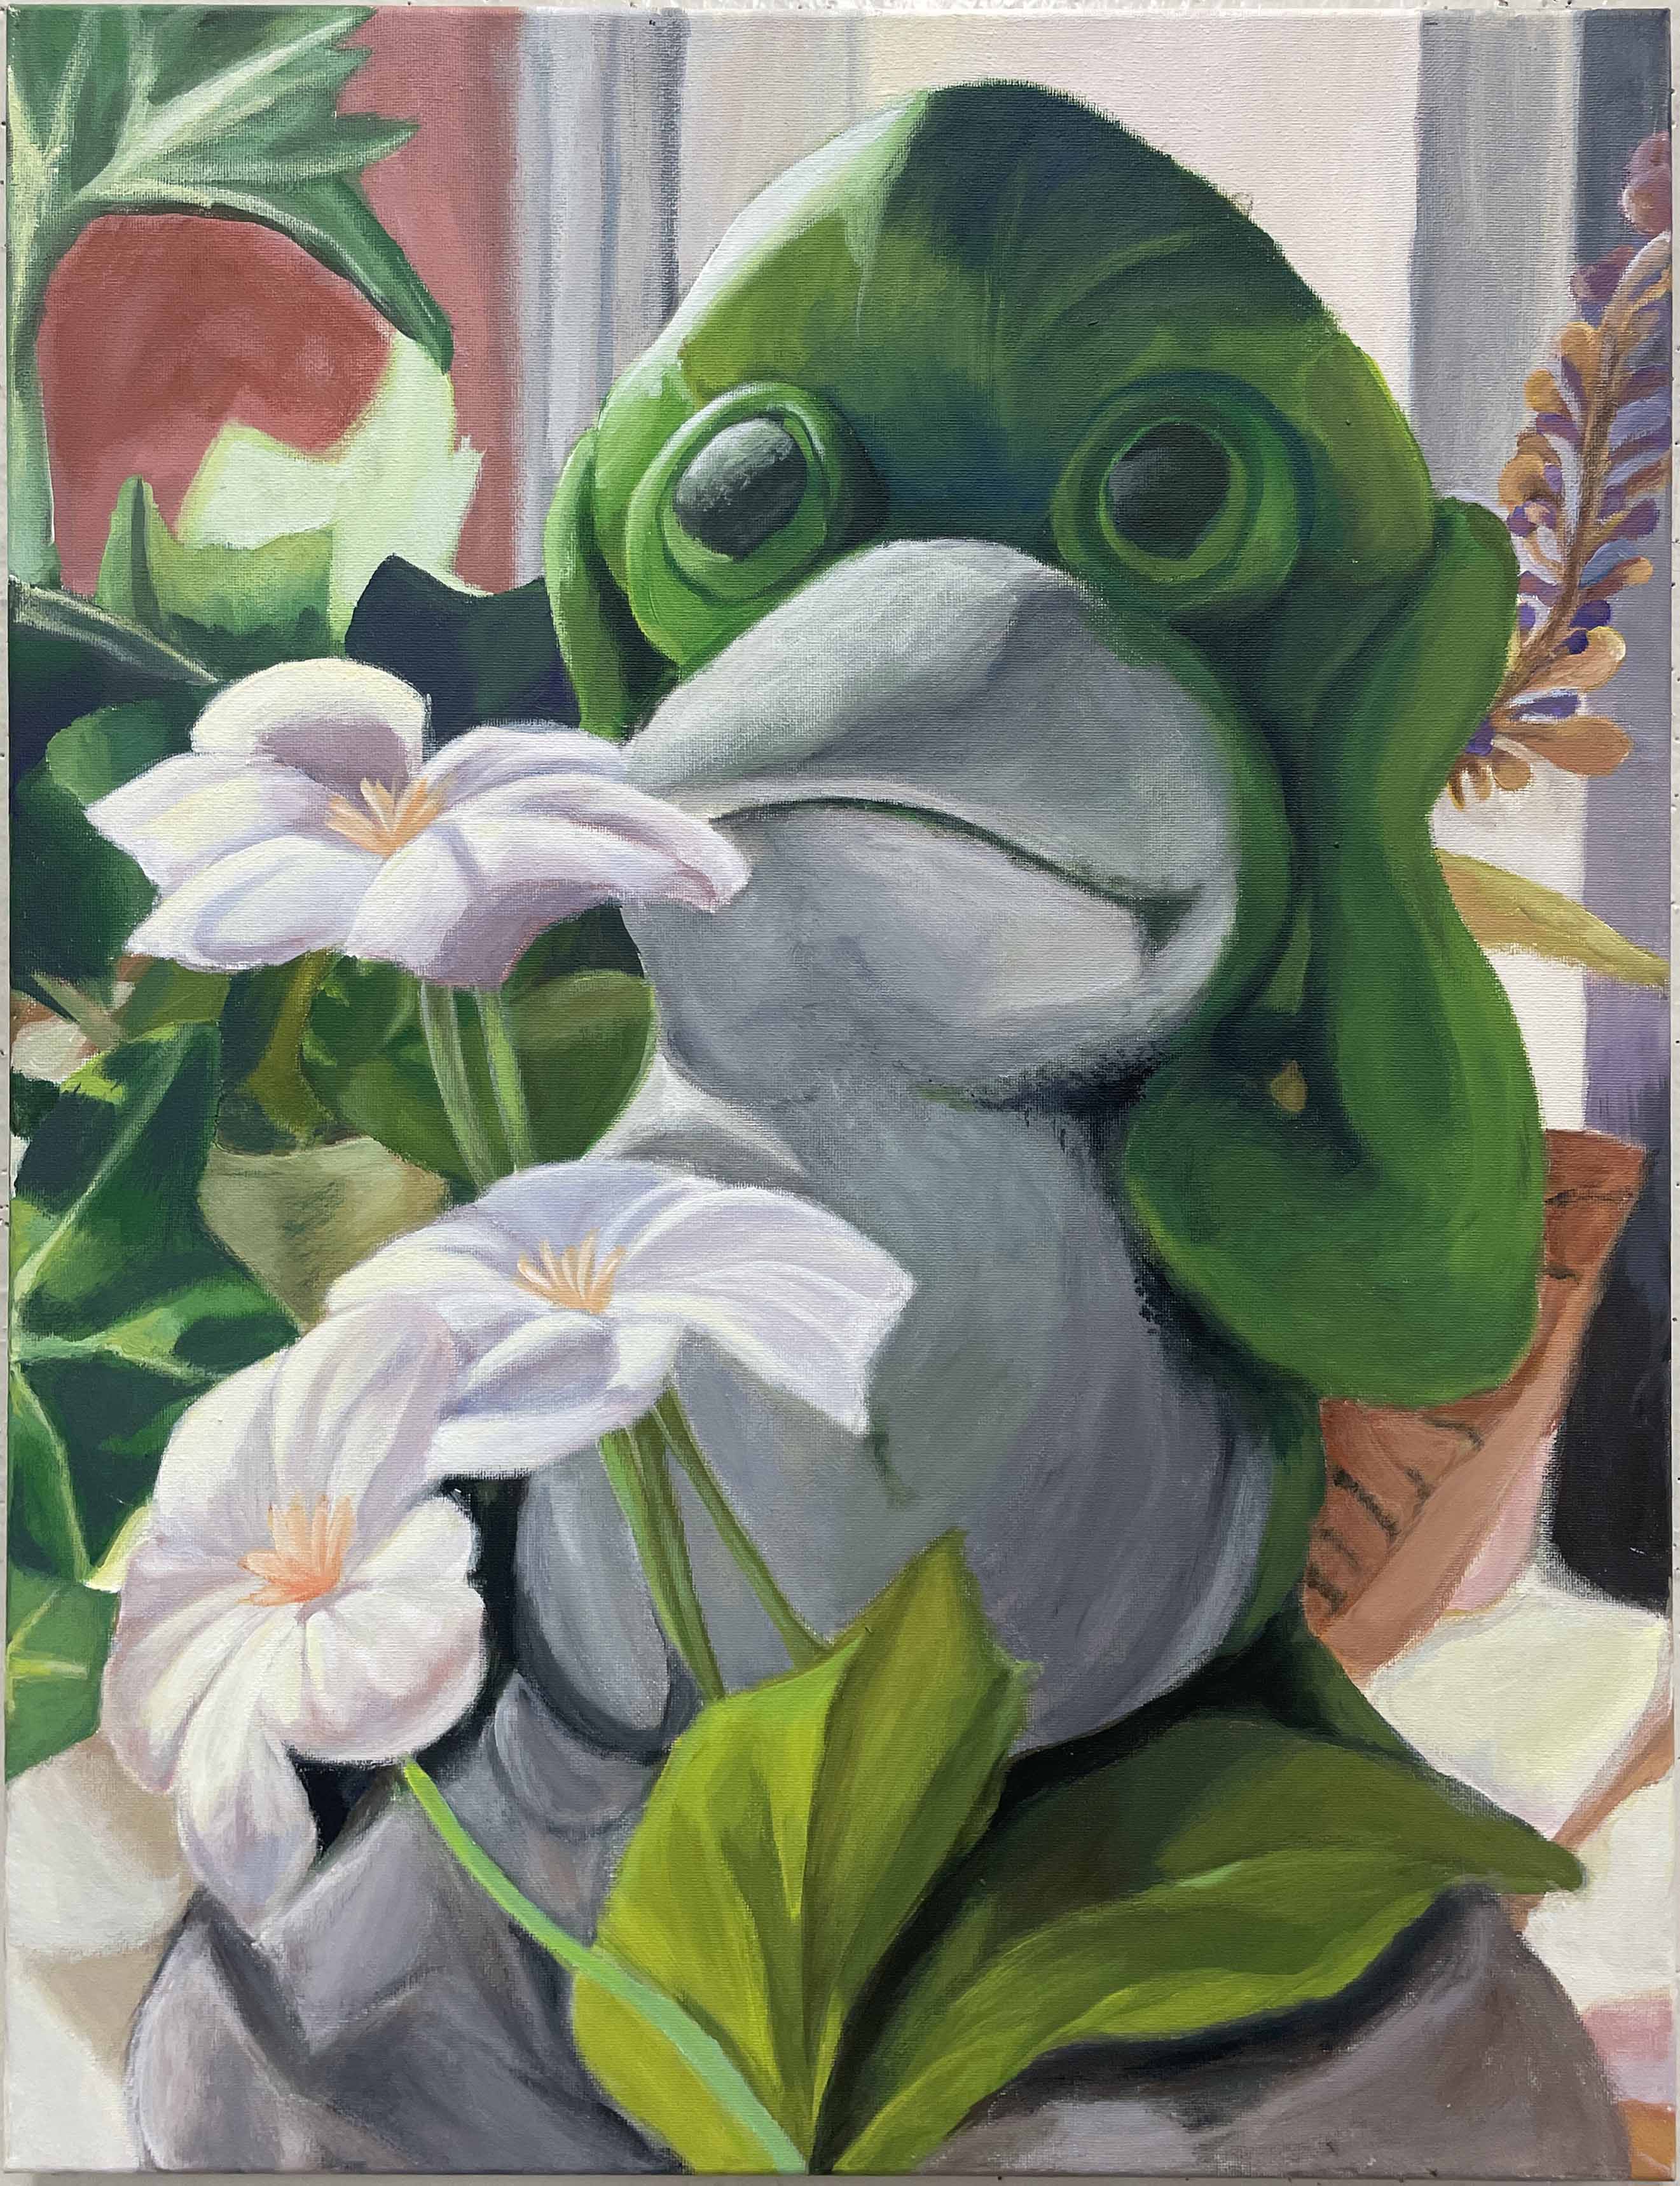 A photograph of a painting of a frog